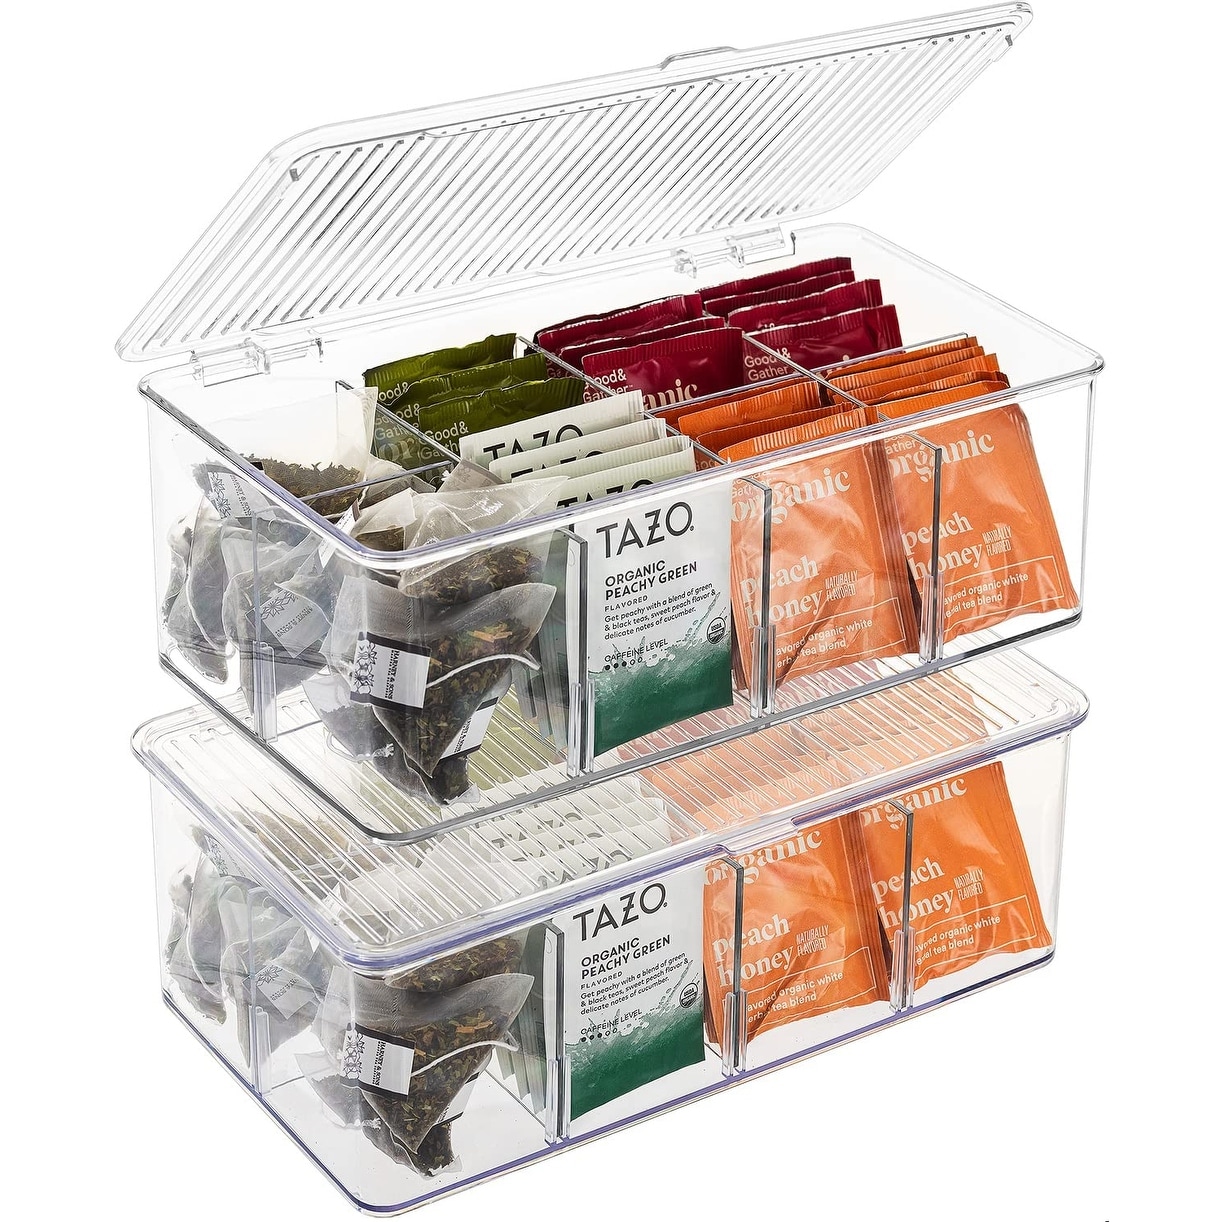 https://ak1.ostkcdn.com/images/products/is/images/direct/0a050527219d71b417f2065750e3386d0817956c/Sorbus-Organizer-Bins%2C-with-lids-%26-Removable-Compartments%2C-Kitchen-Pantry-Organization-Storage-bins-with-Dividers.jpg